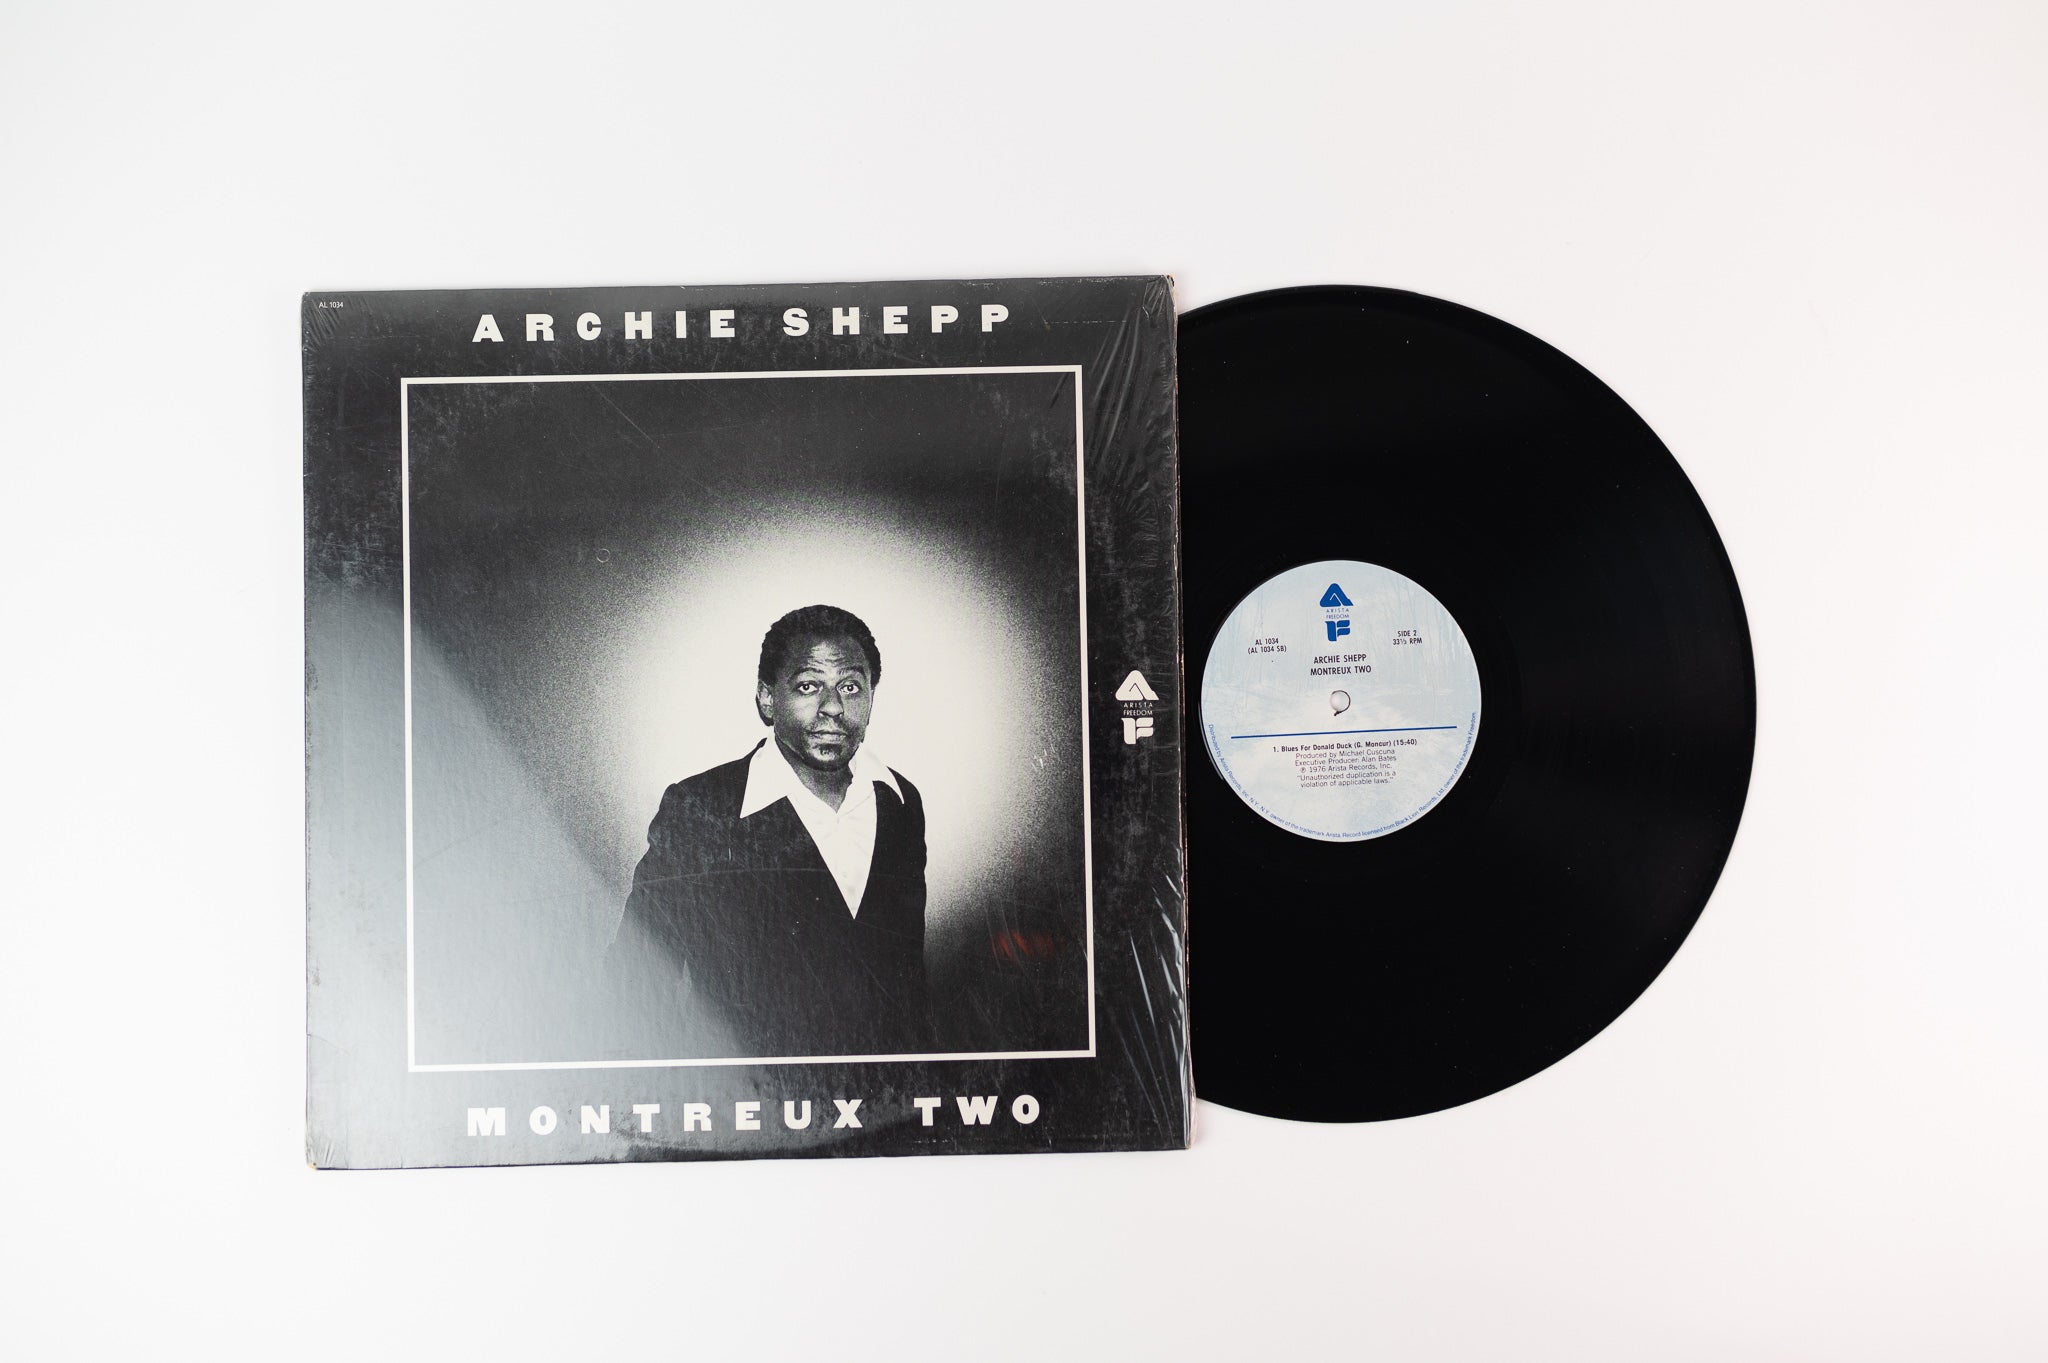 Archie Shepp - Montreux Two on Arista Freedom